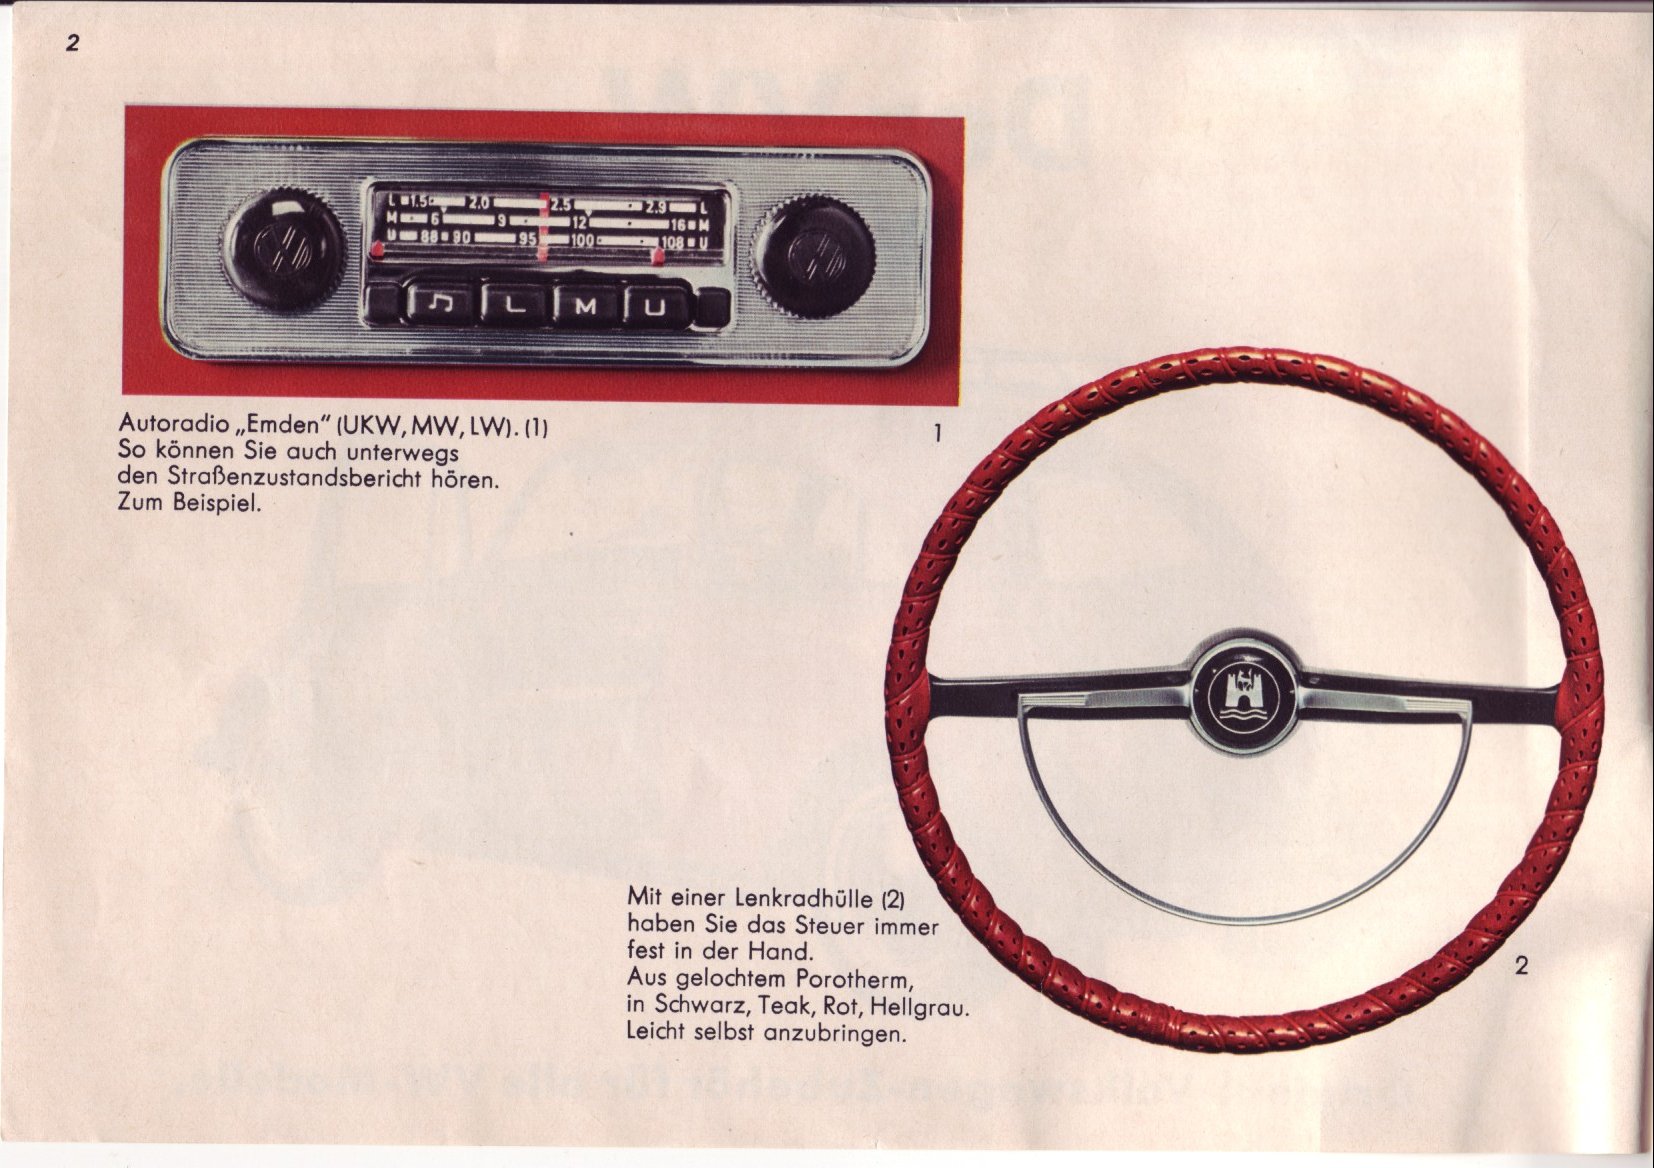  VW Archives - October, 1968 Accessories - German